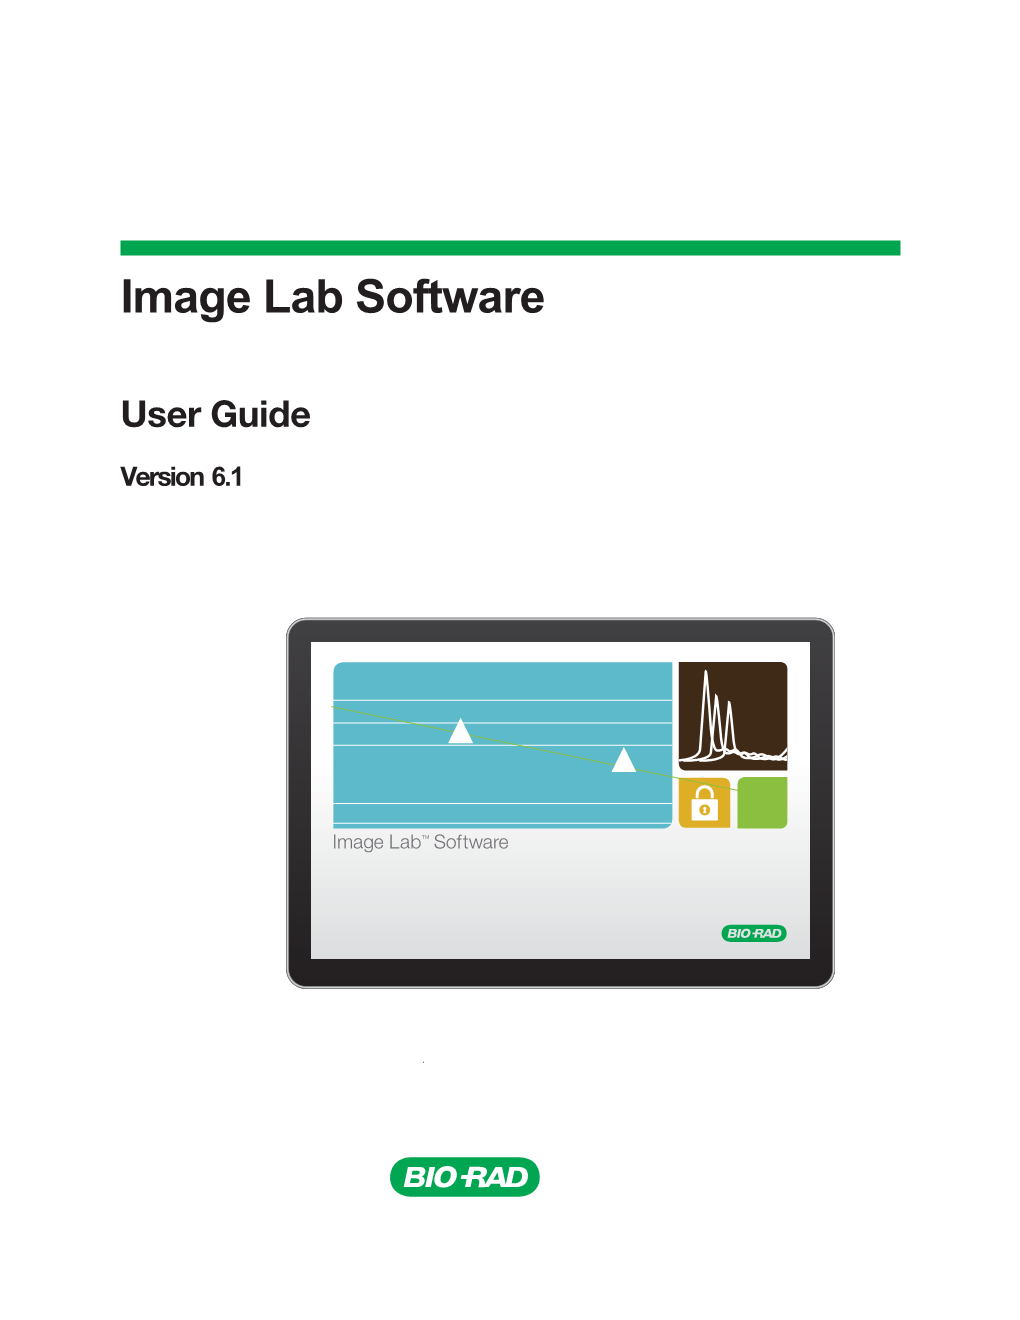 Image Lab Software User Guide